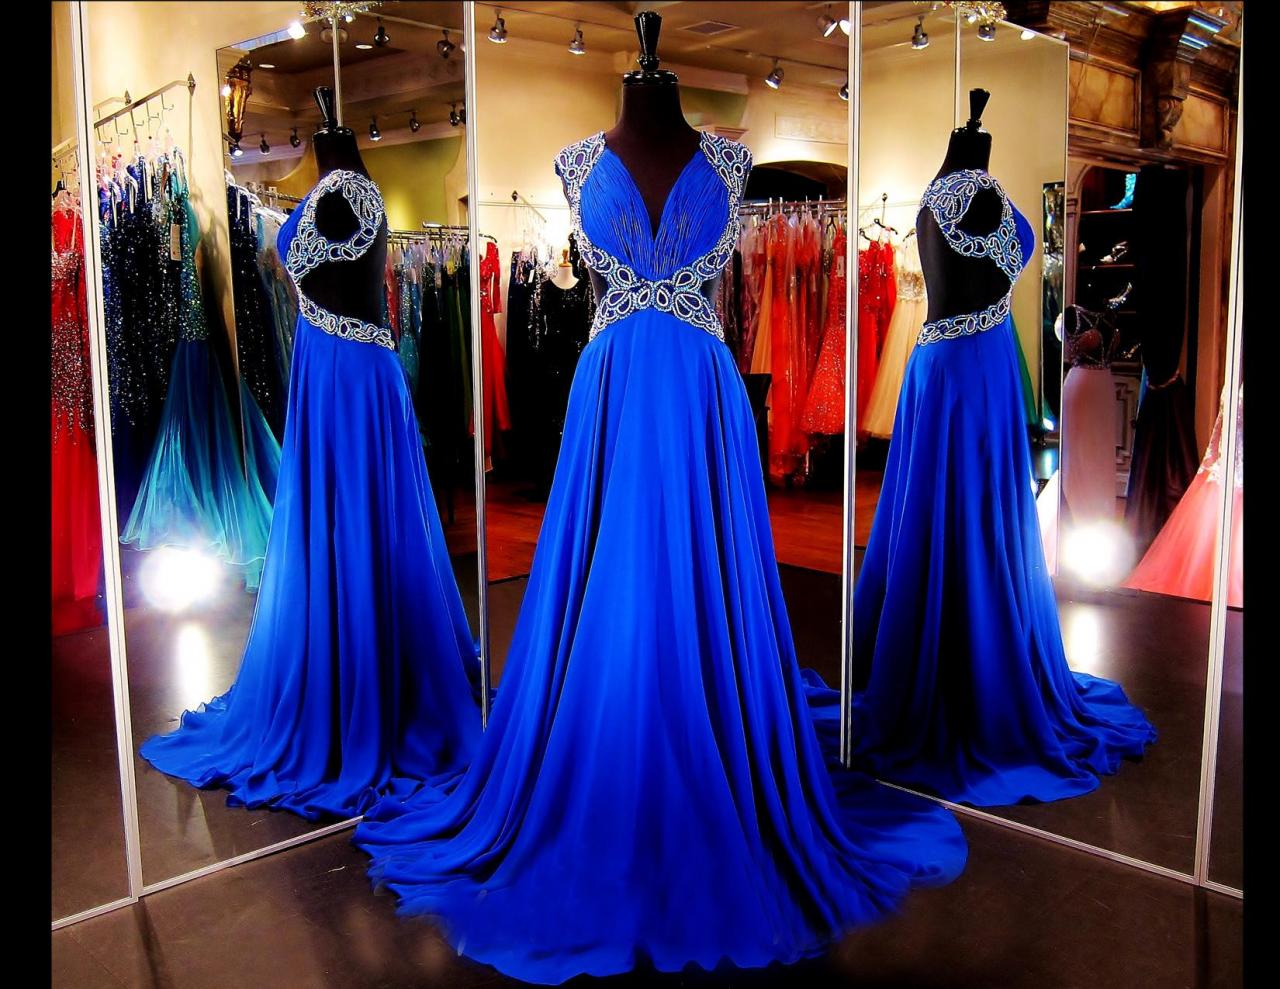 Royal Blue Prom Dress,formal Dress,prom Dress Backless,prom Gown,prom Dress Long,homecoming Dress Long, 8th Grade Prom Dress,holiday